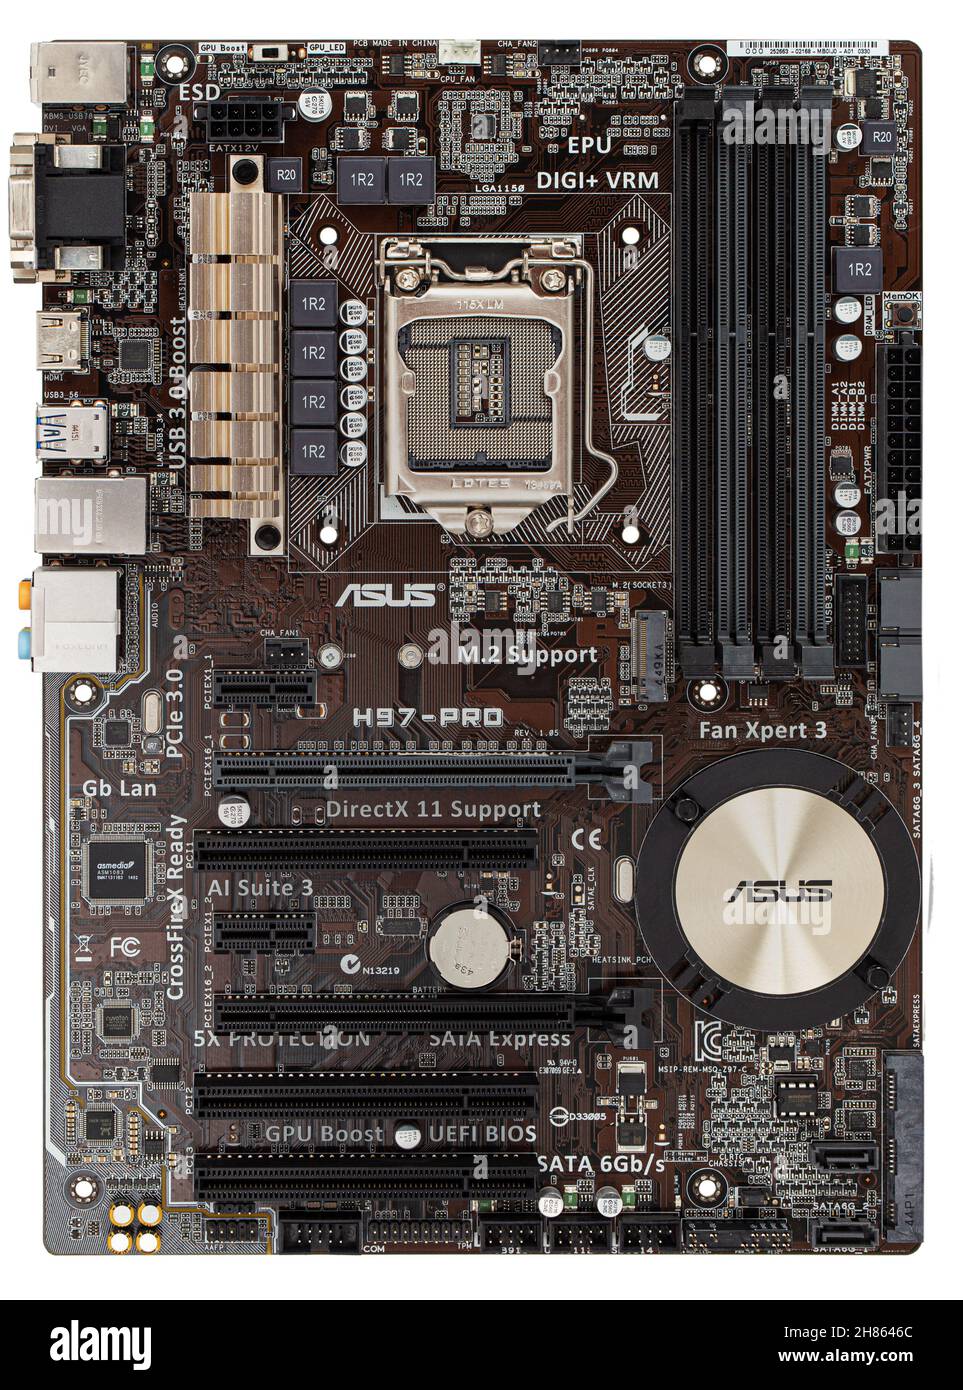 Сomputer motherboard board Asus H97-PRO lga 1150, isolated on white  background Stock Photo - Alamy